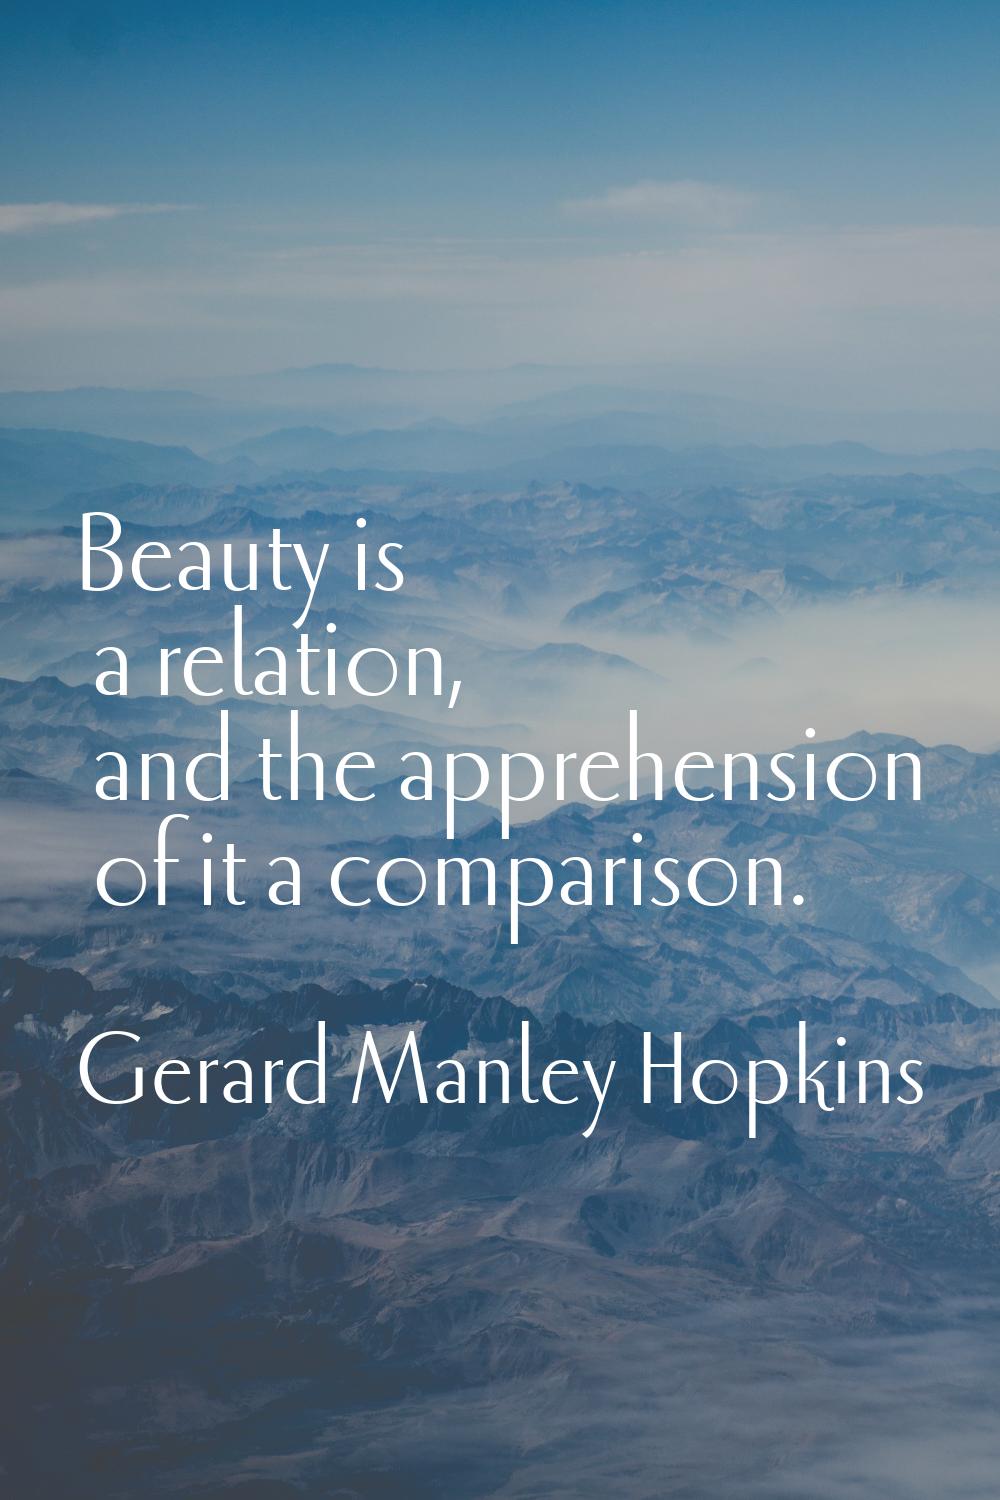 Beauty is a relation, and the apprehension of it a comparison.